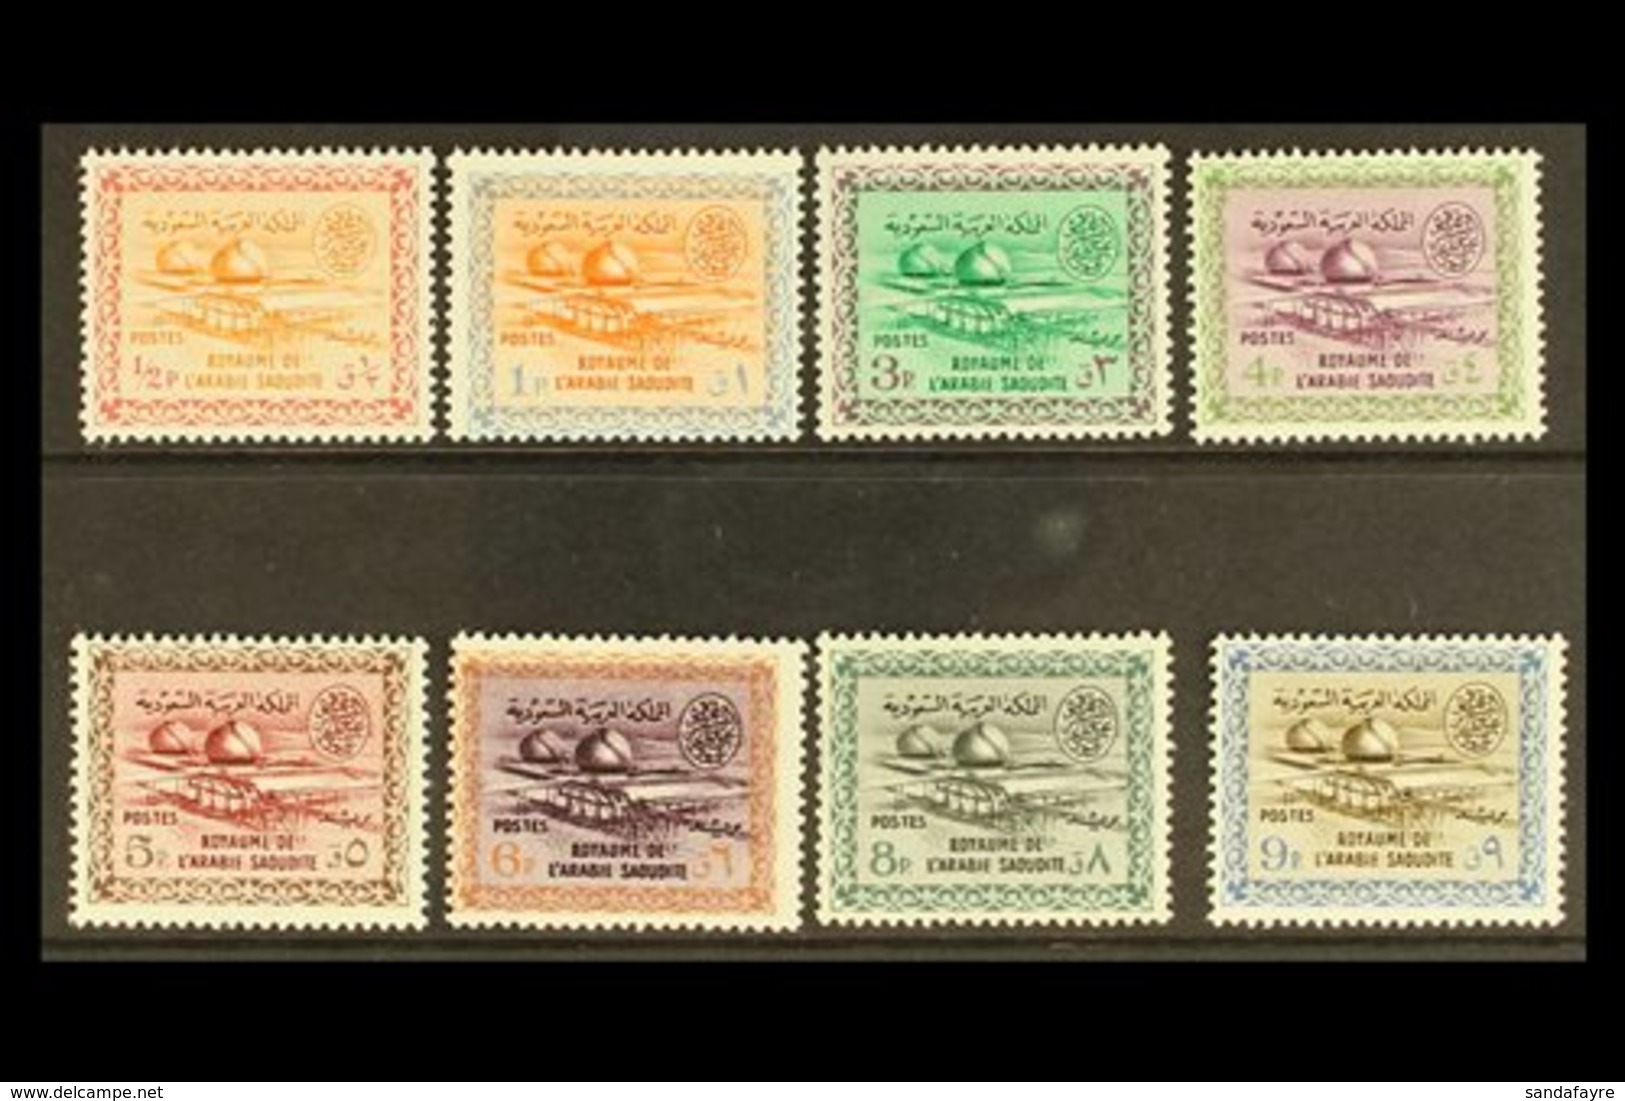 1963 - 65 Gas Oil Plant Set With Wmk, Complete, SG 467/74, Very Fine Never Hinged Mint. (8 Stamps) For More Images, Plea - Arabia Saudita